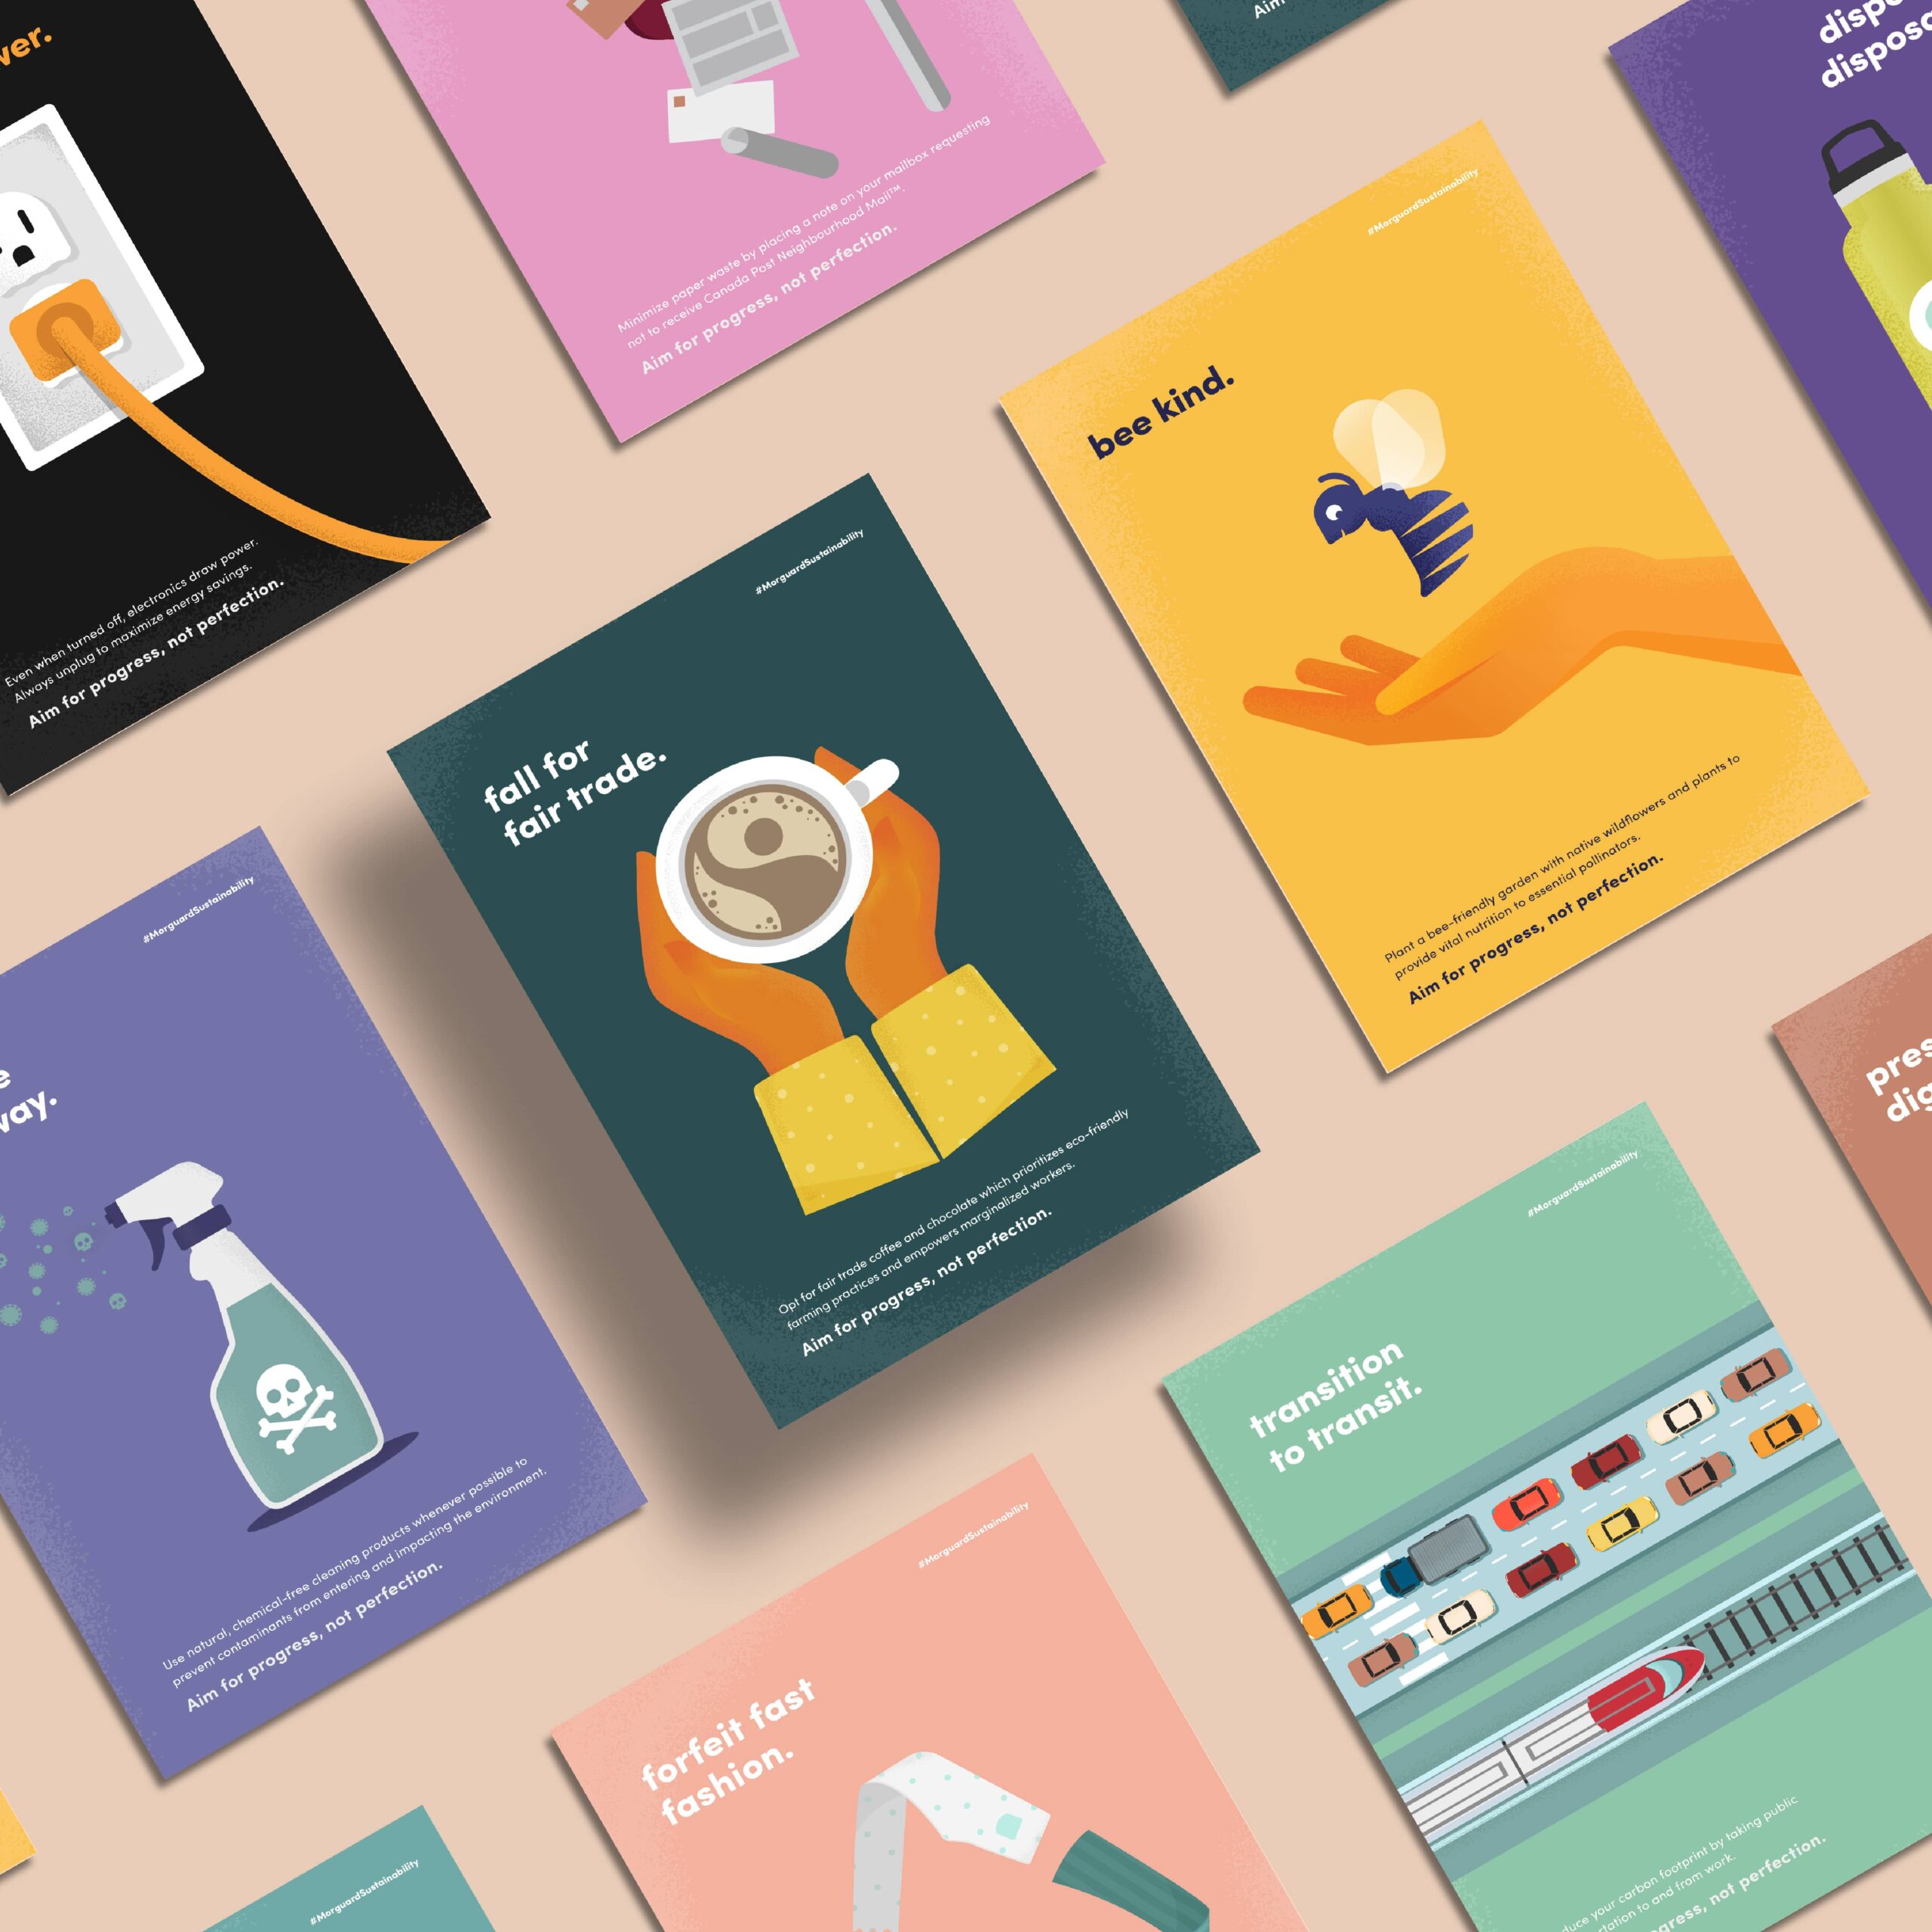 Brightly coloured posters, featuring simplistic illustrations